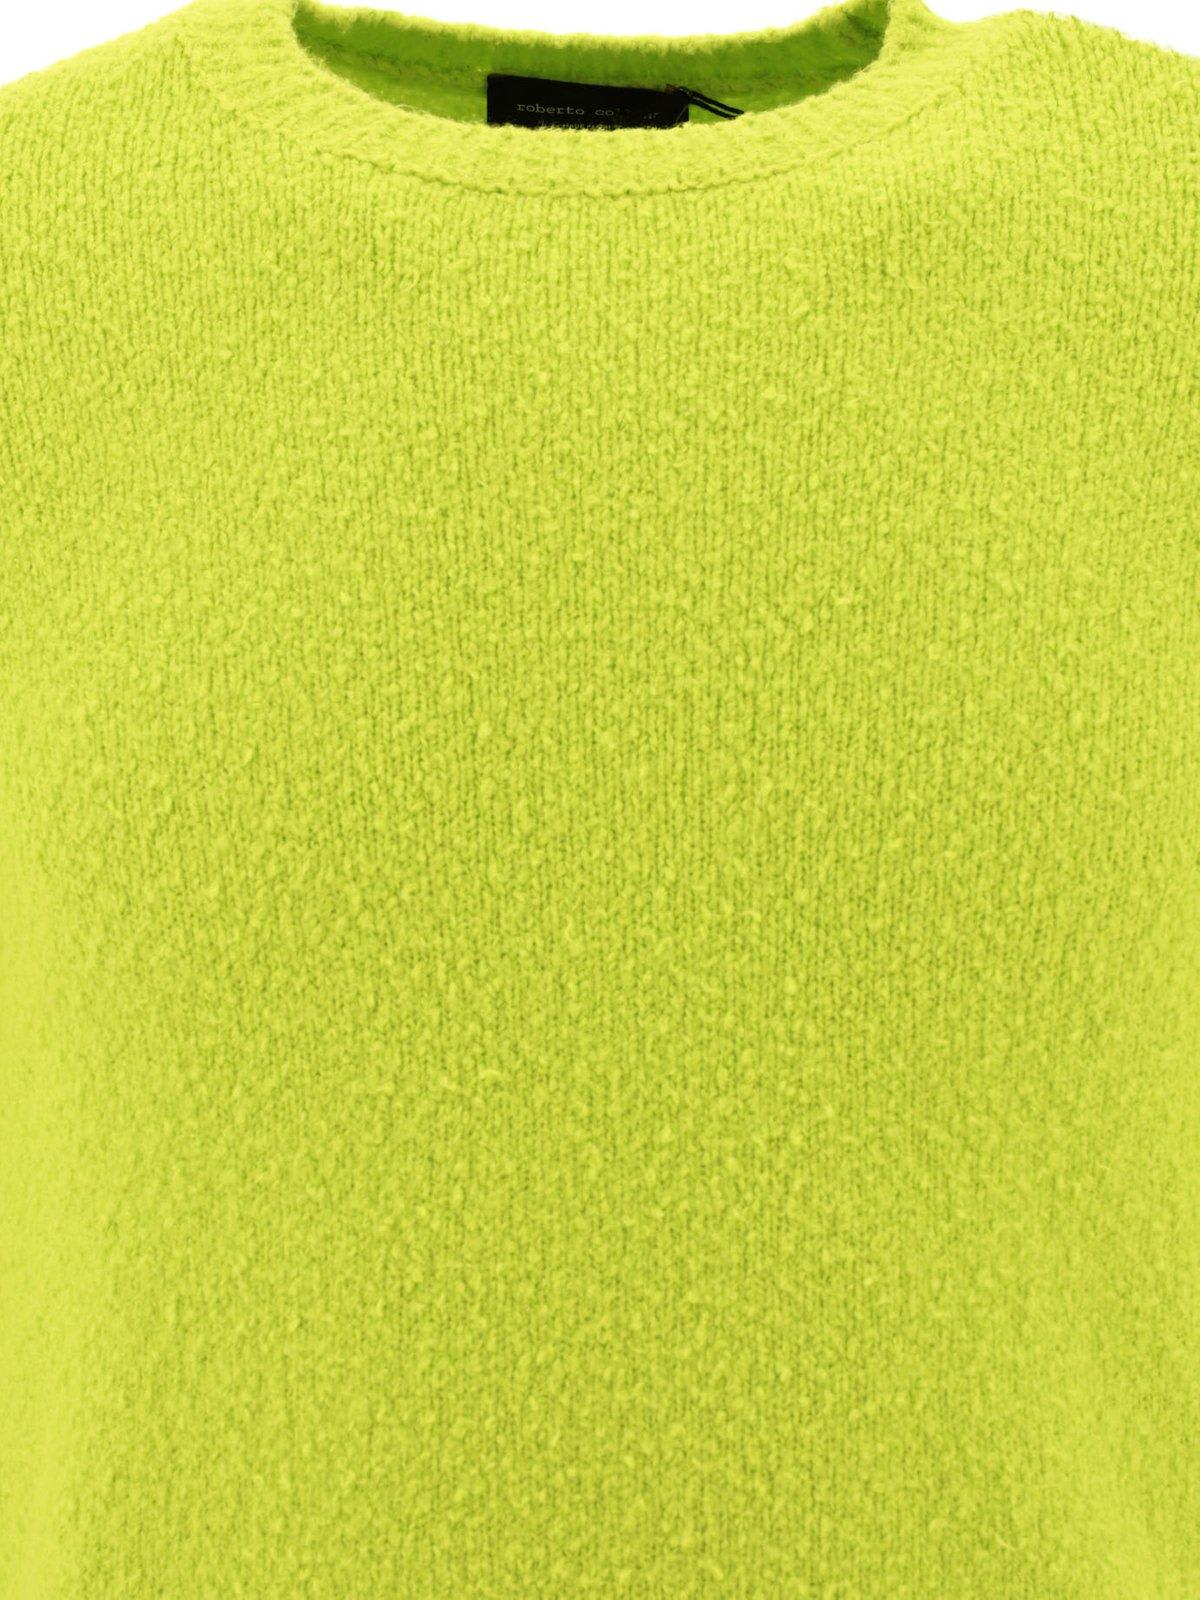 Shop Roberto Collina Crewneck Straight Hem Knitted Jumper In Lime